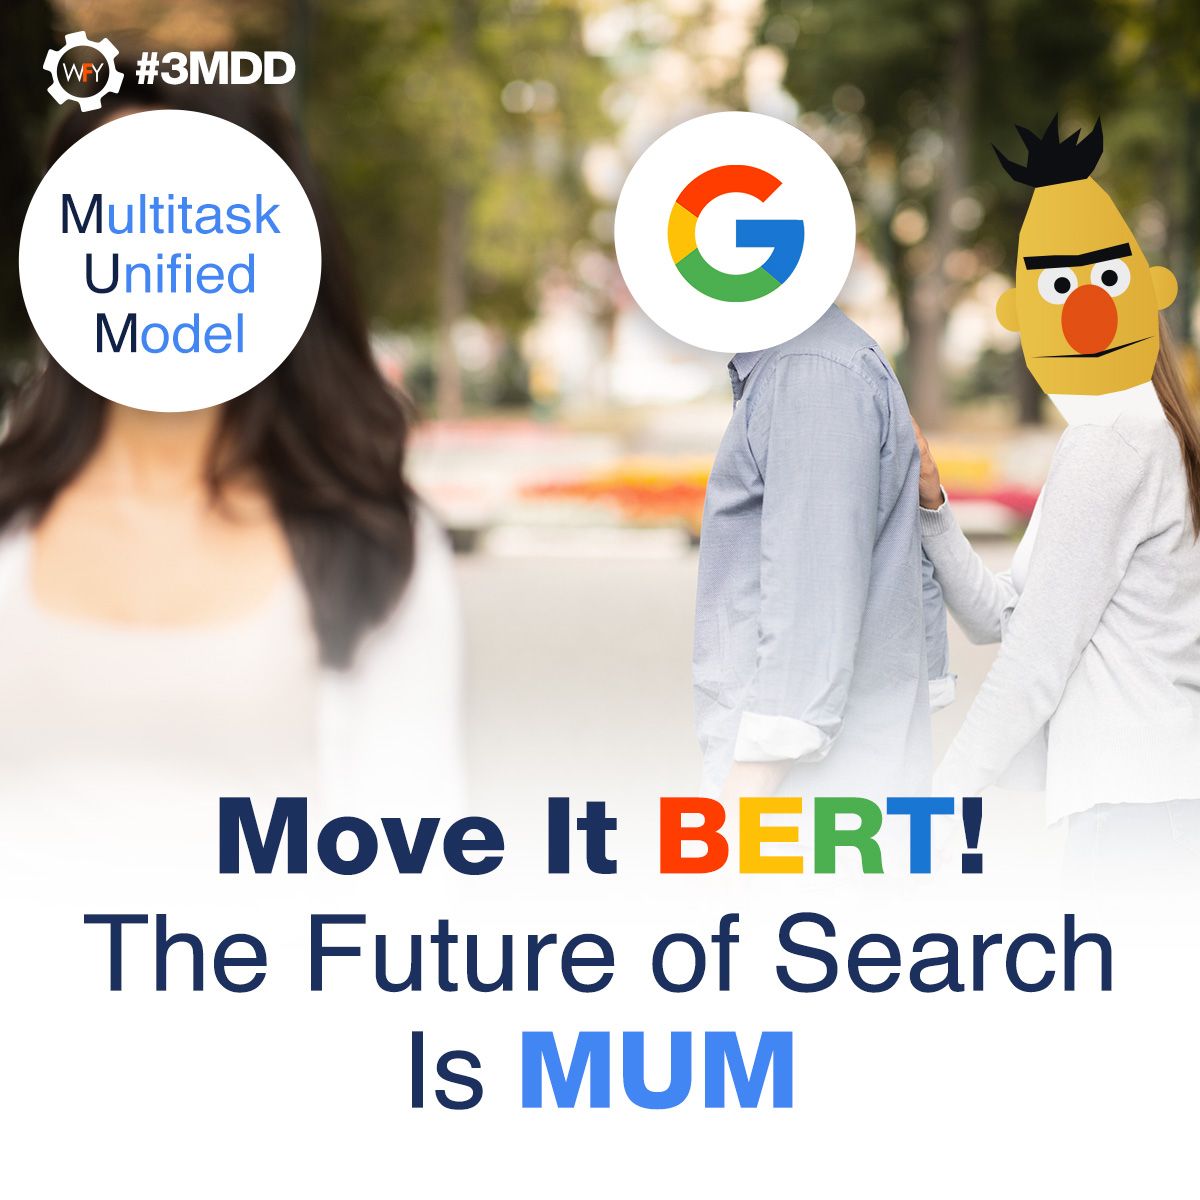 Move It BERT! The Future of Search Is MUM